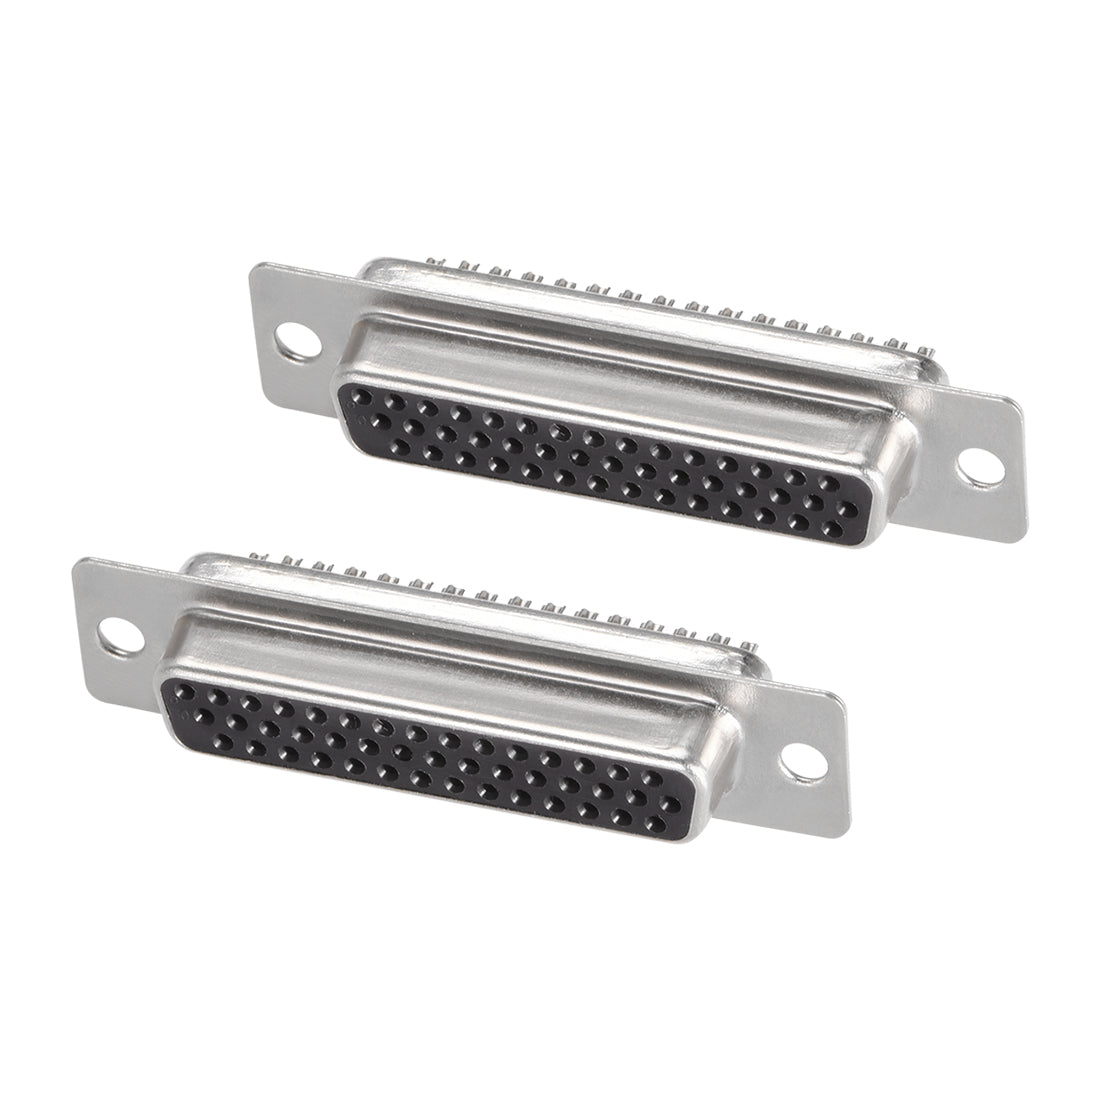 uxcell Uxcell D-sub Connector DB44 Female Socket 44-pin 3-row High Density Port Terminal Breakout for Mechanical Equipment CNC Computers Instrumentation 2pcs